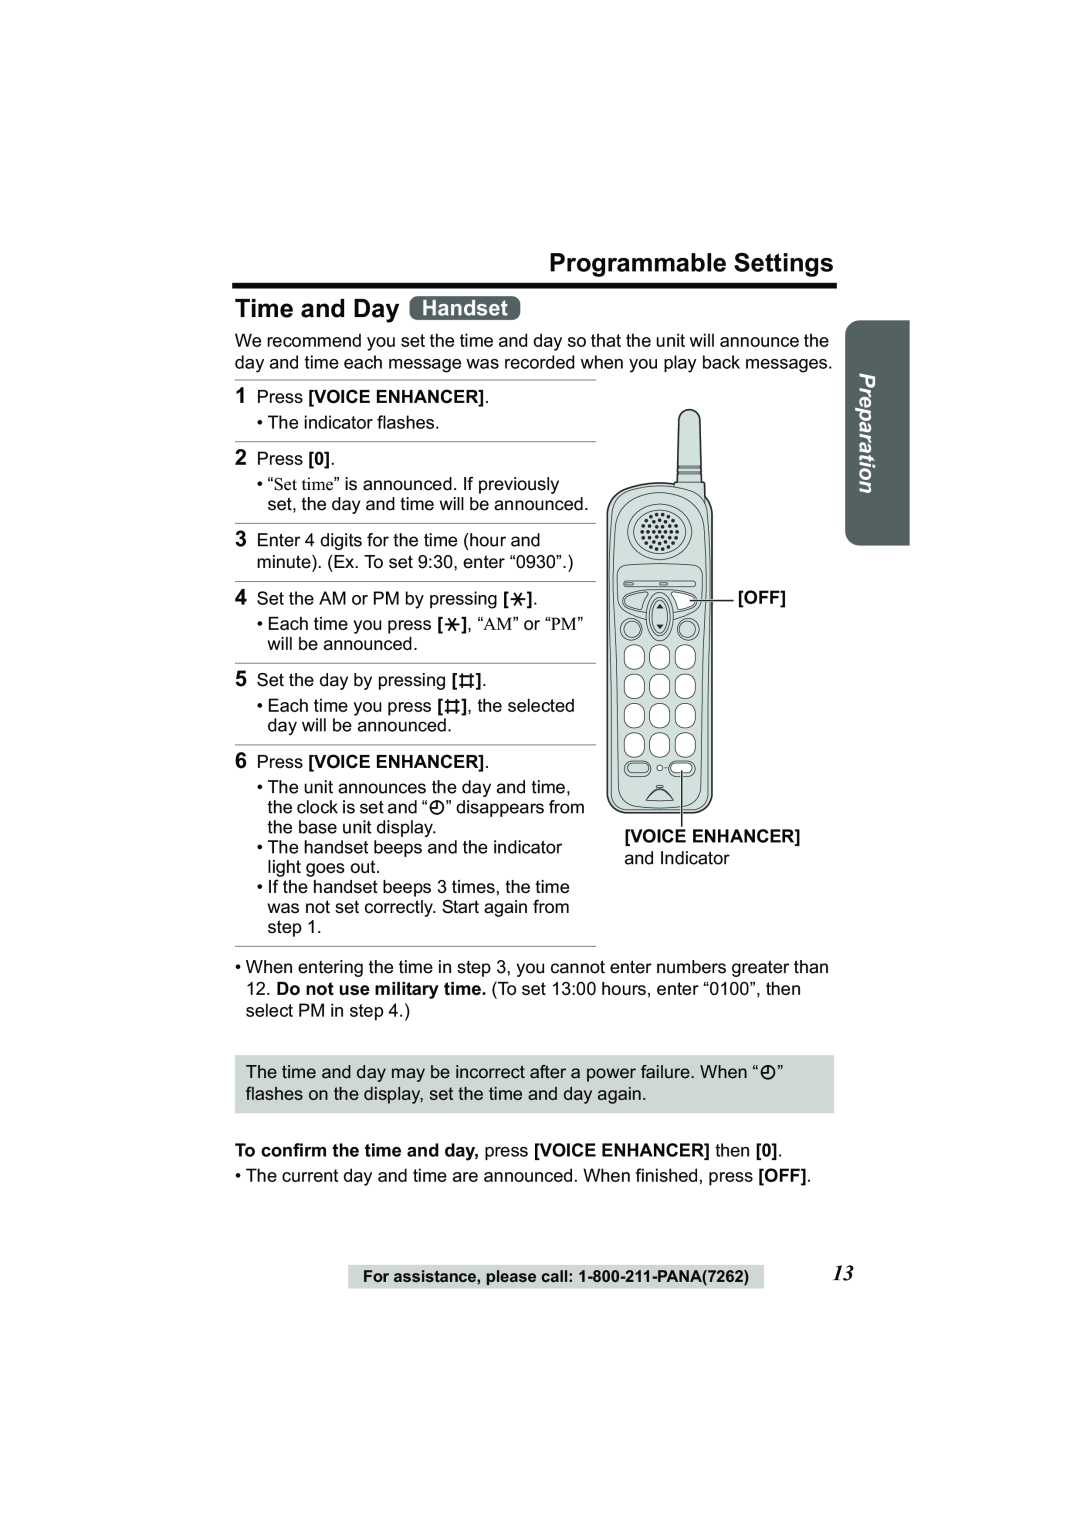 Panasonic Acr14CF.tmp Programmable Settings Time and Day Handset, 1Press VOICE ENHANCER, Preparation, Off Voice Enhancer 